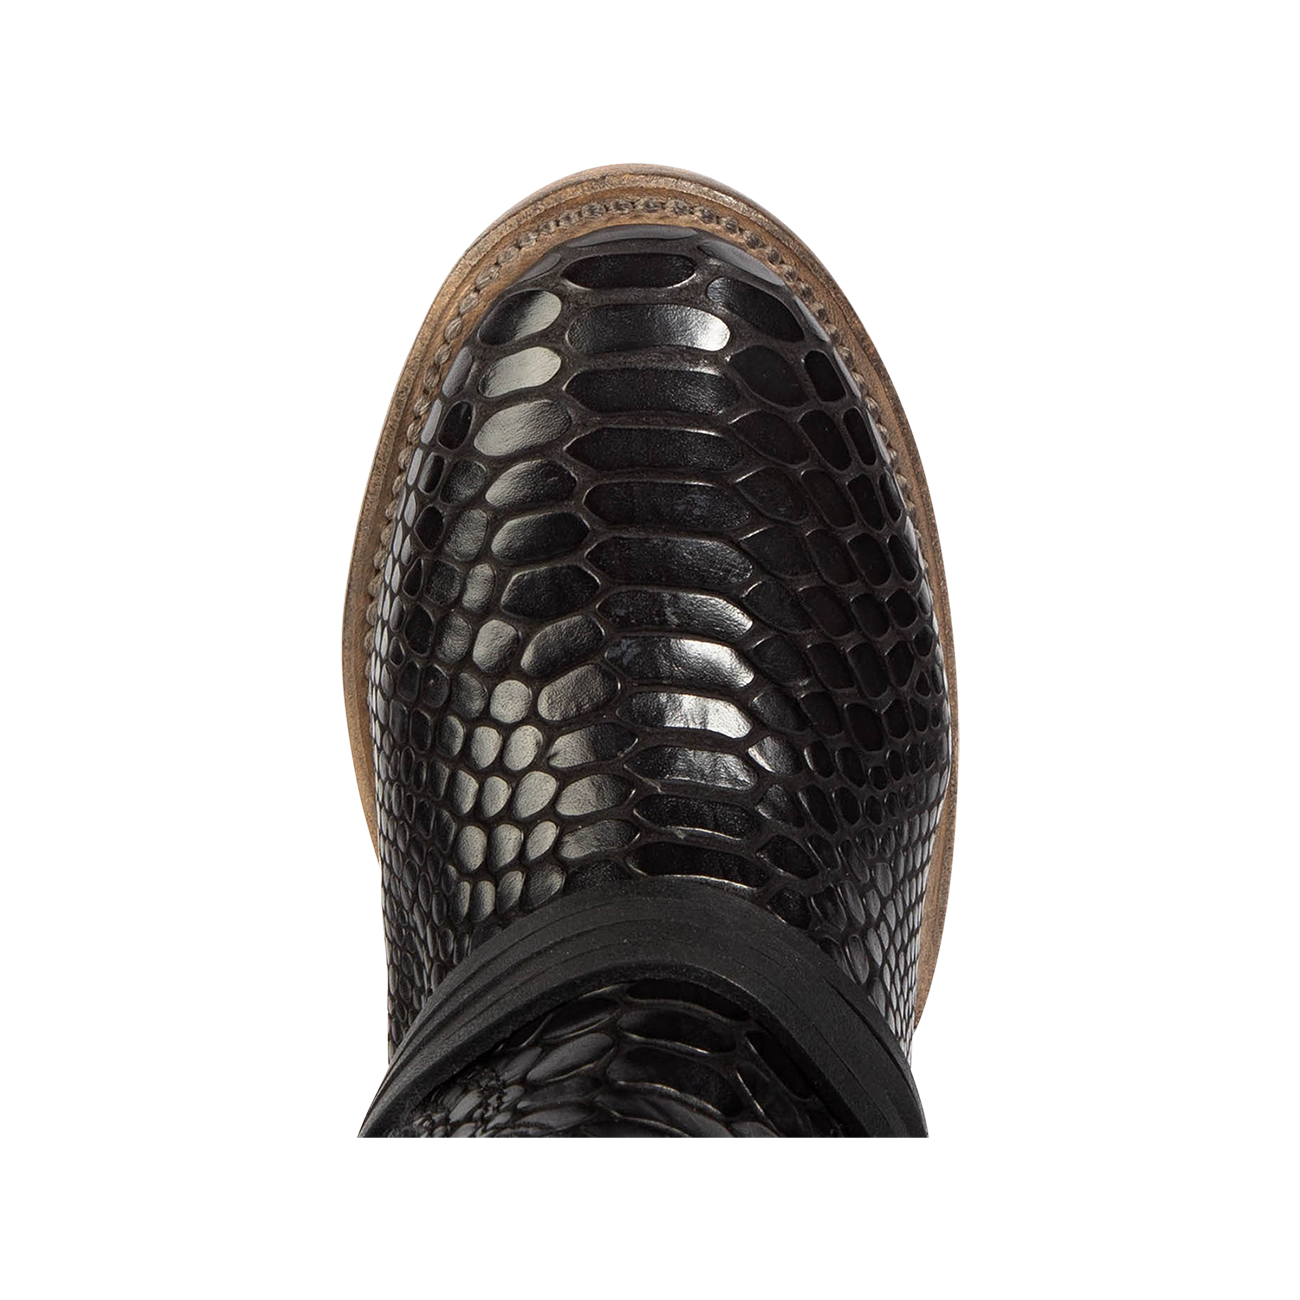 Top view showing round toe and leather ankle lacing on FREEBIRD women's Coal black snake tall boot